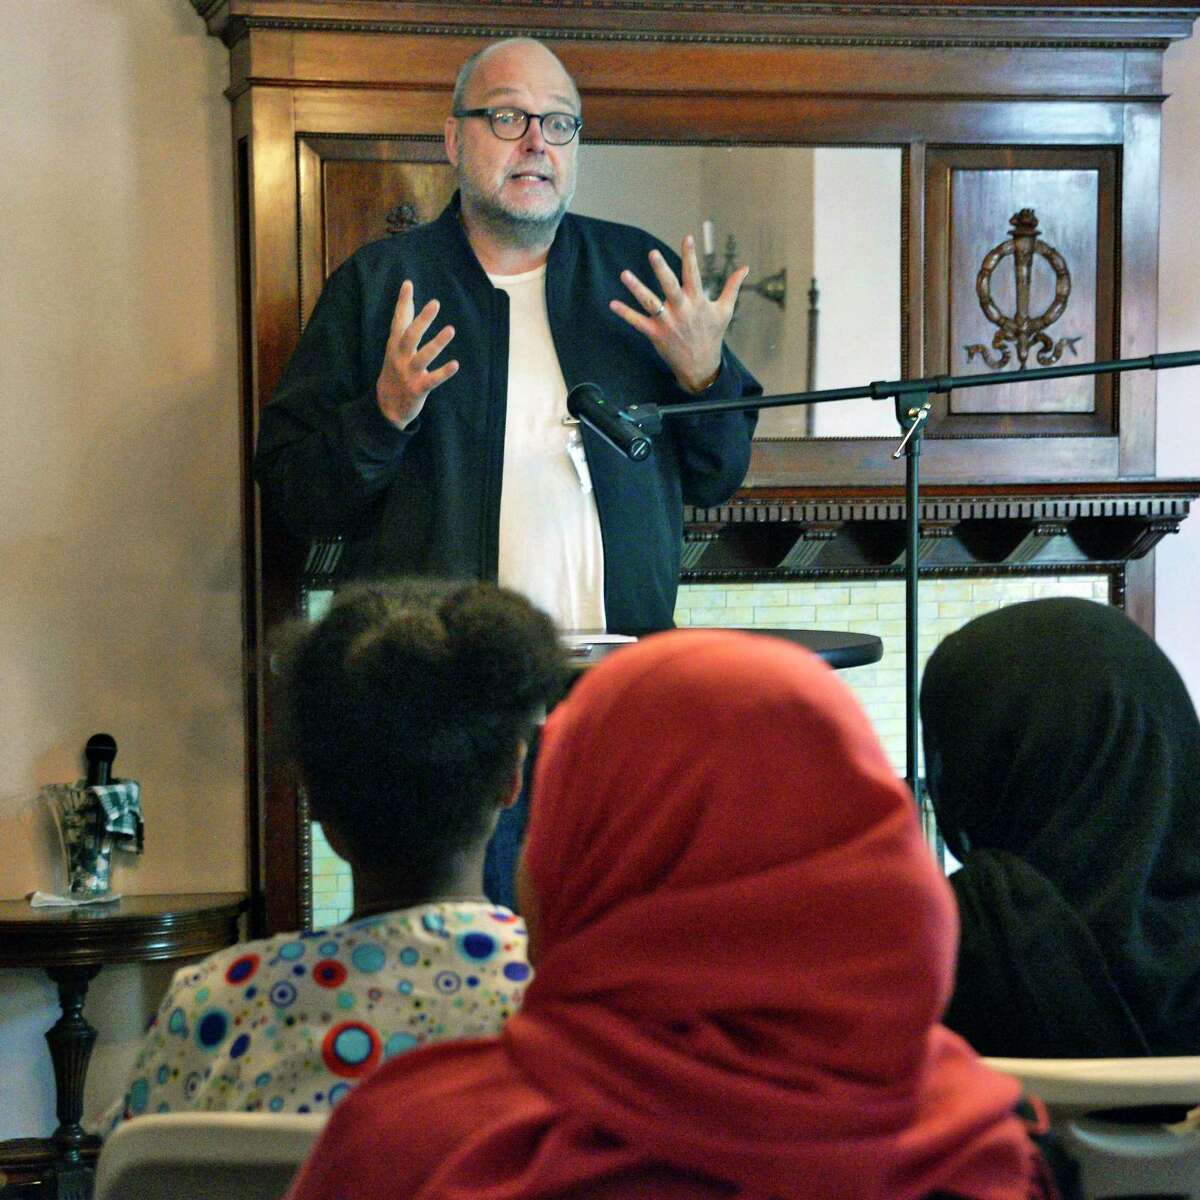 Poet and professor Mark Nowak who teaches refugees and immigrants who are learning English to write poetry in English, introduces the Women's Club of Albany's Refugees: Poetry from the Heart program Wednesday June 20, 2018 in Albany, NY. (John Carl D'Annibale/Times Union)